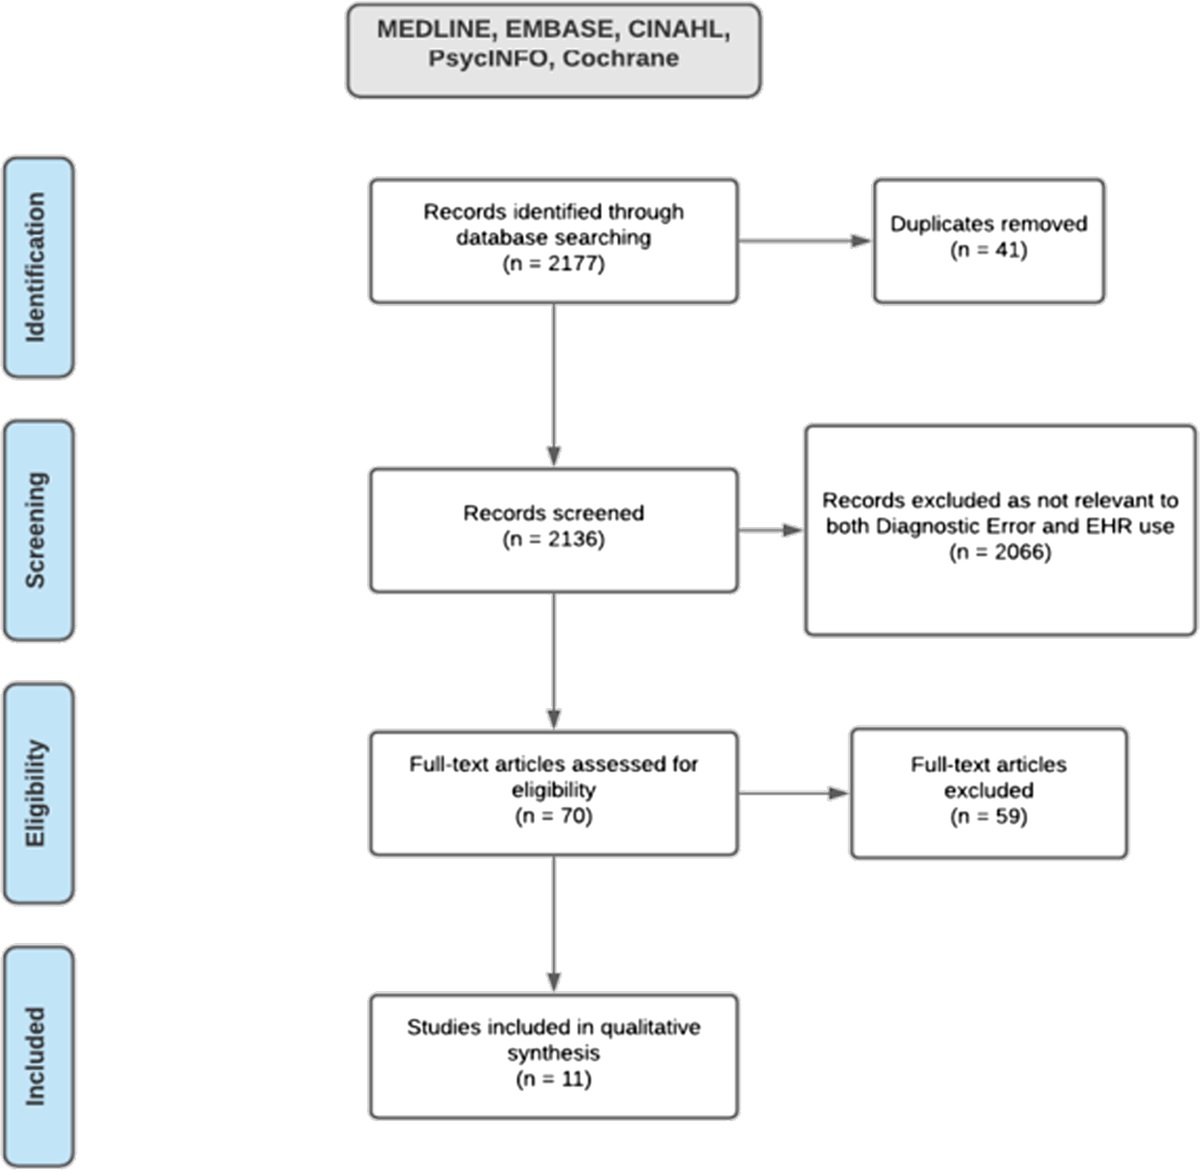 Electronic Health Record Use Issues and Diagnostic Error: A Scoping Review and Framework